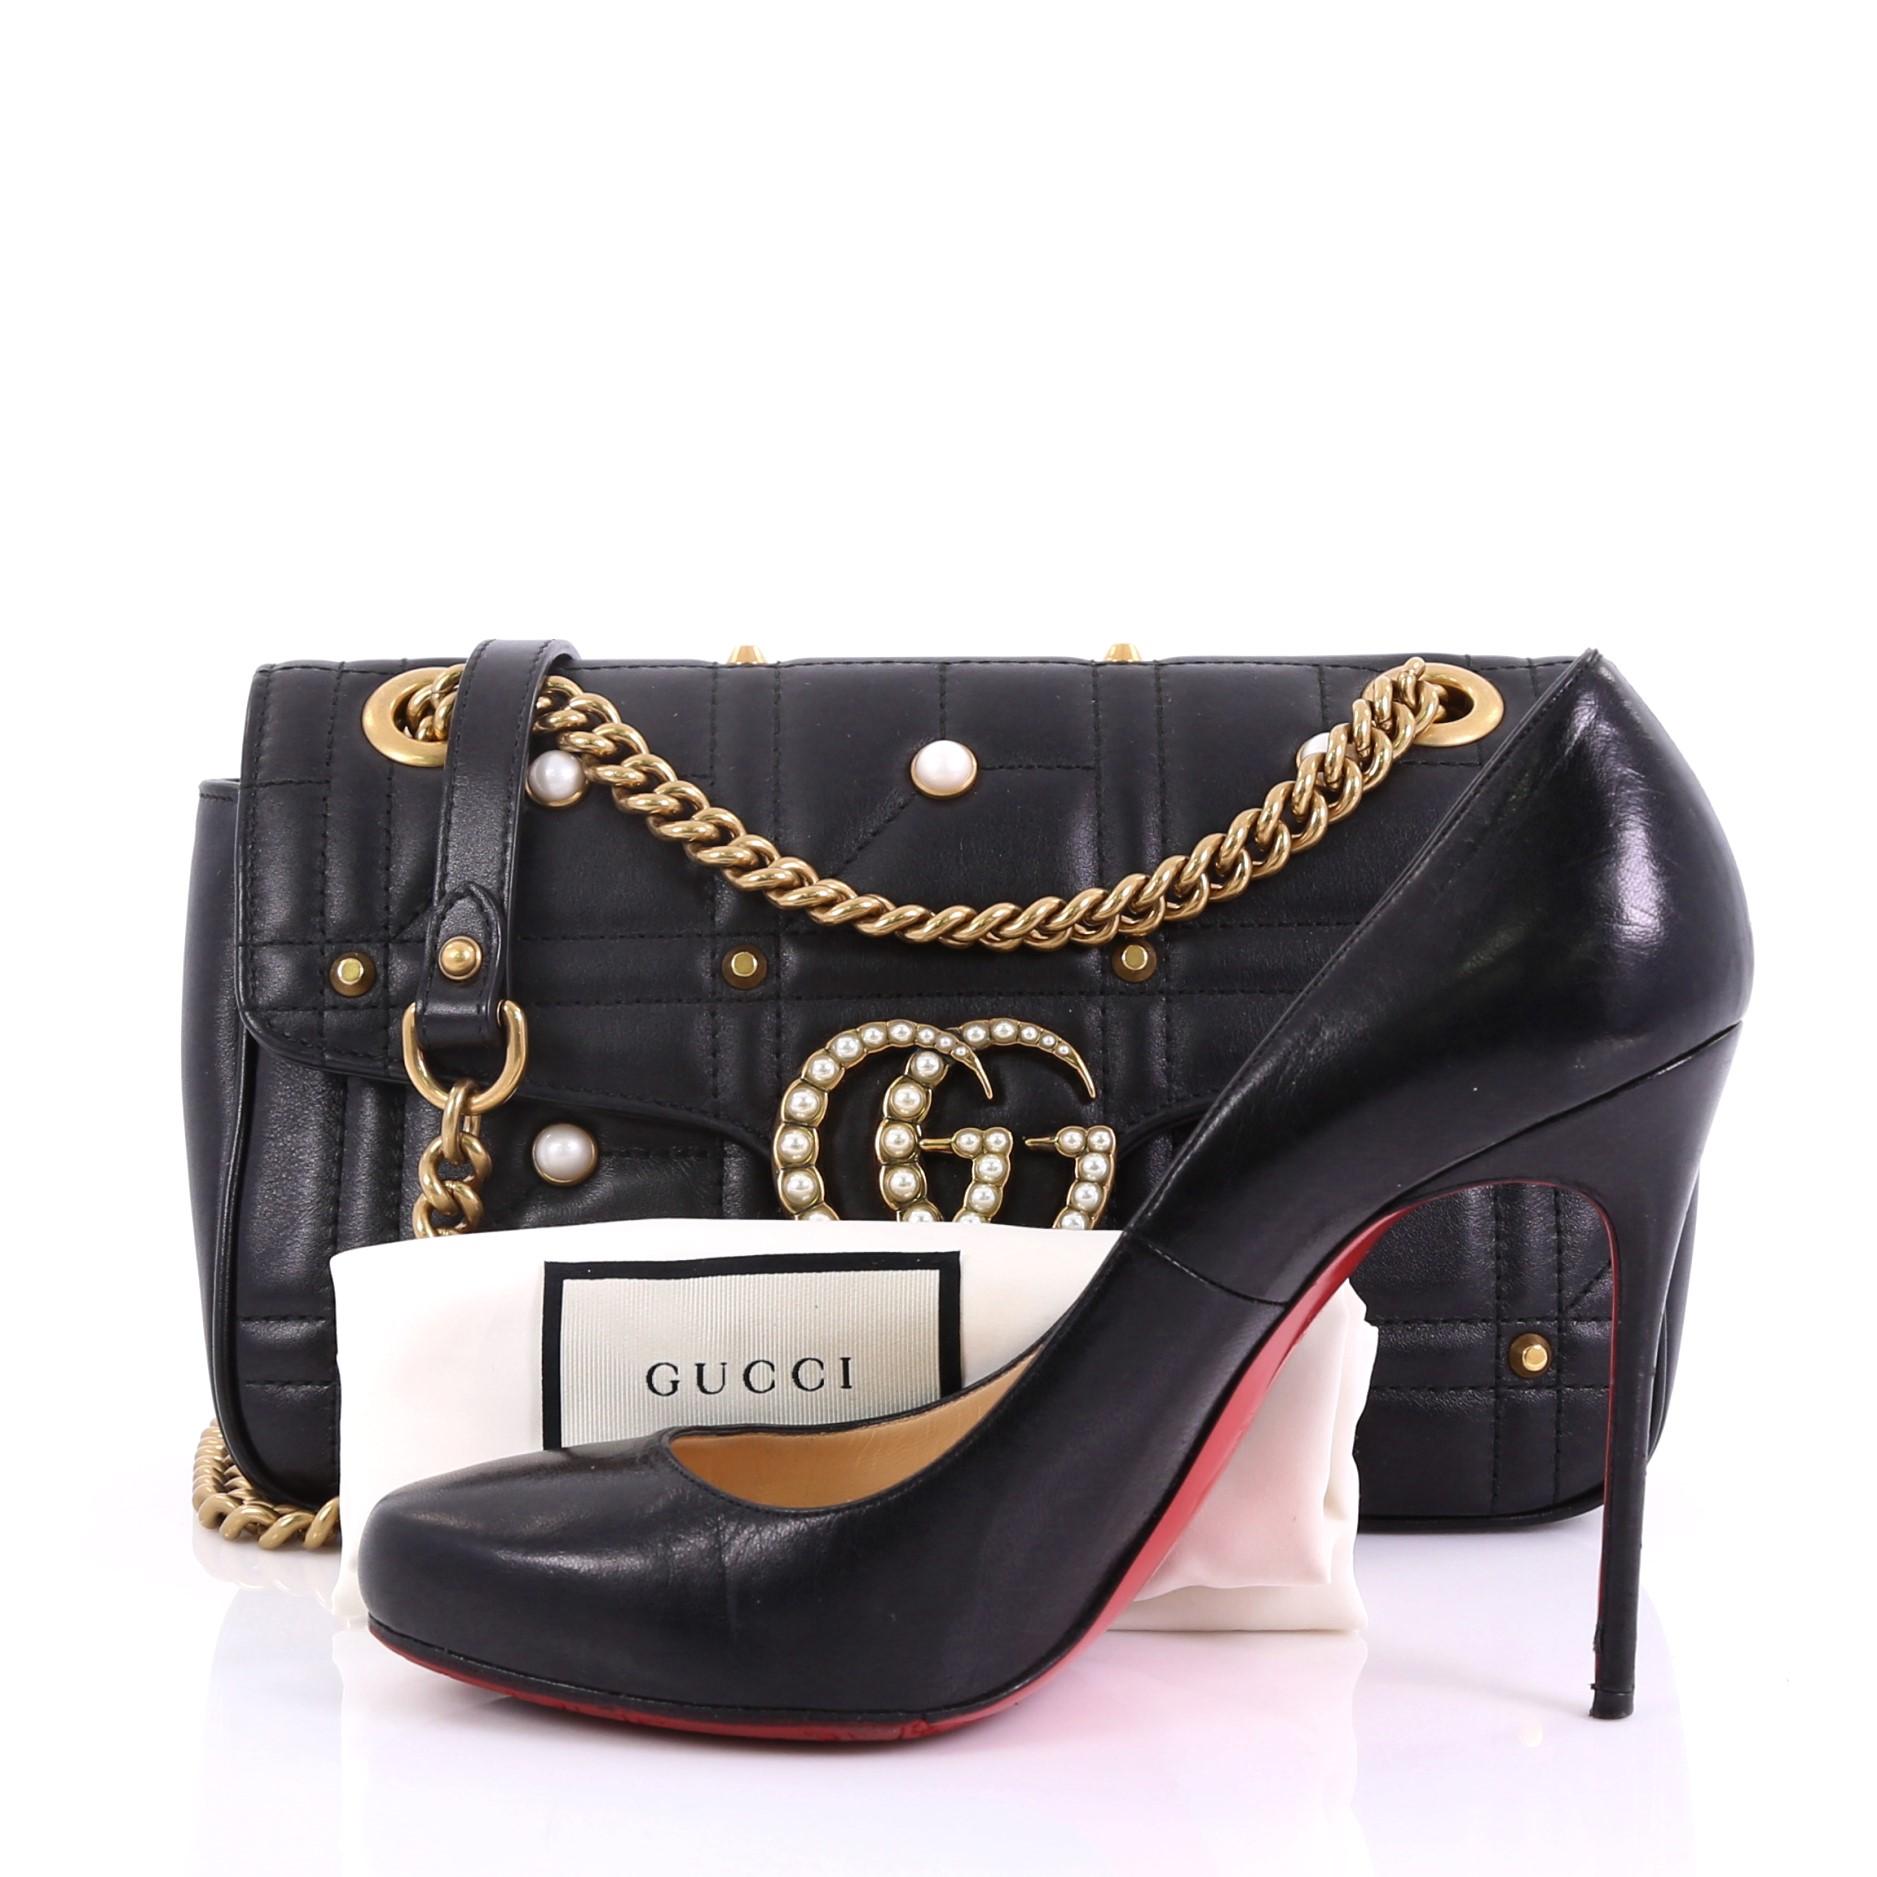 This Gucci Pearly GG Marmont Flap Bag Embellished Matelasse Leather Small, crafted from black embellished matelass̩e leather, features sliding chain strap with leather pad, flap top with interlocking GG logo, metal and pearl studs embellishment, and